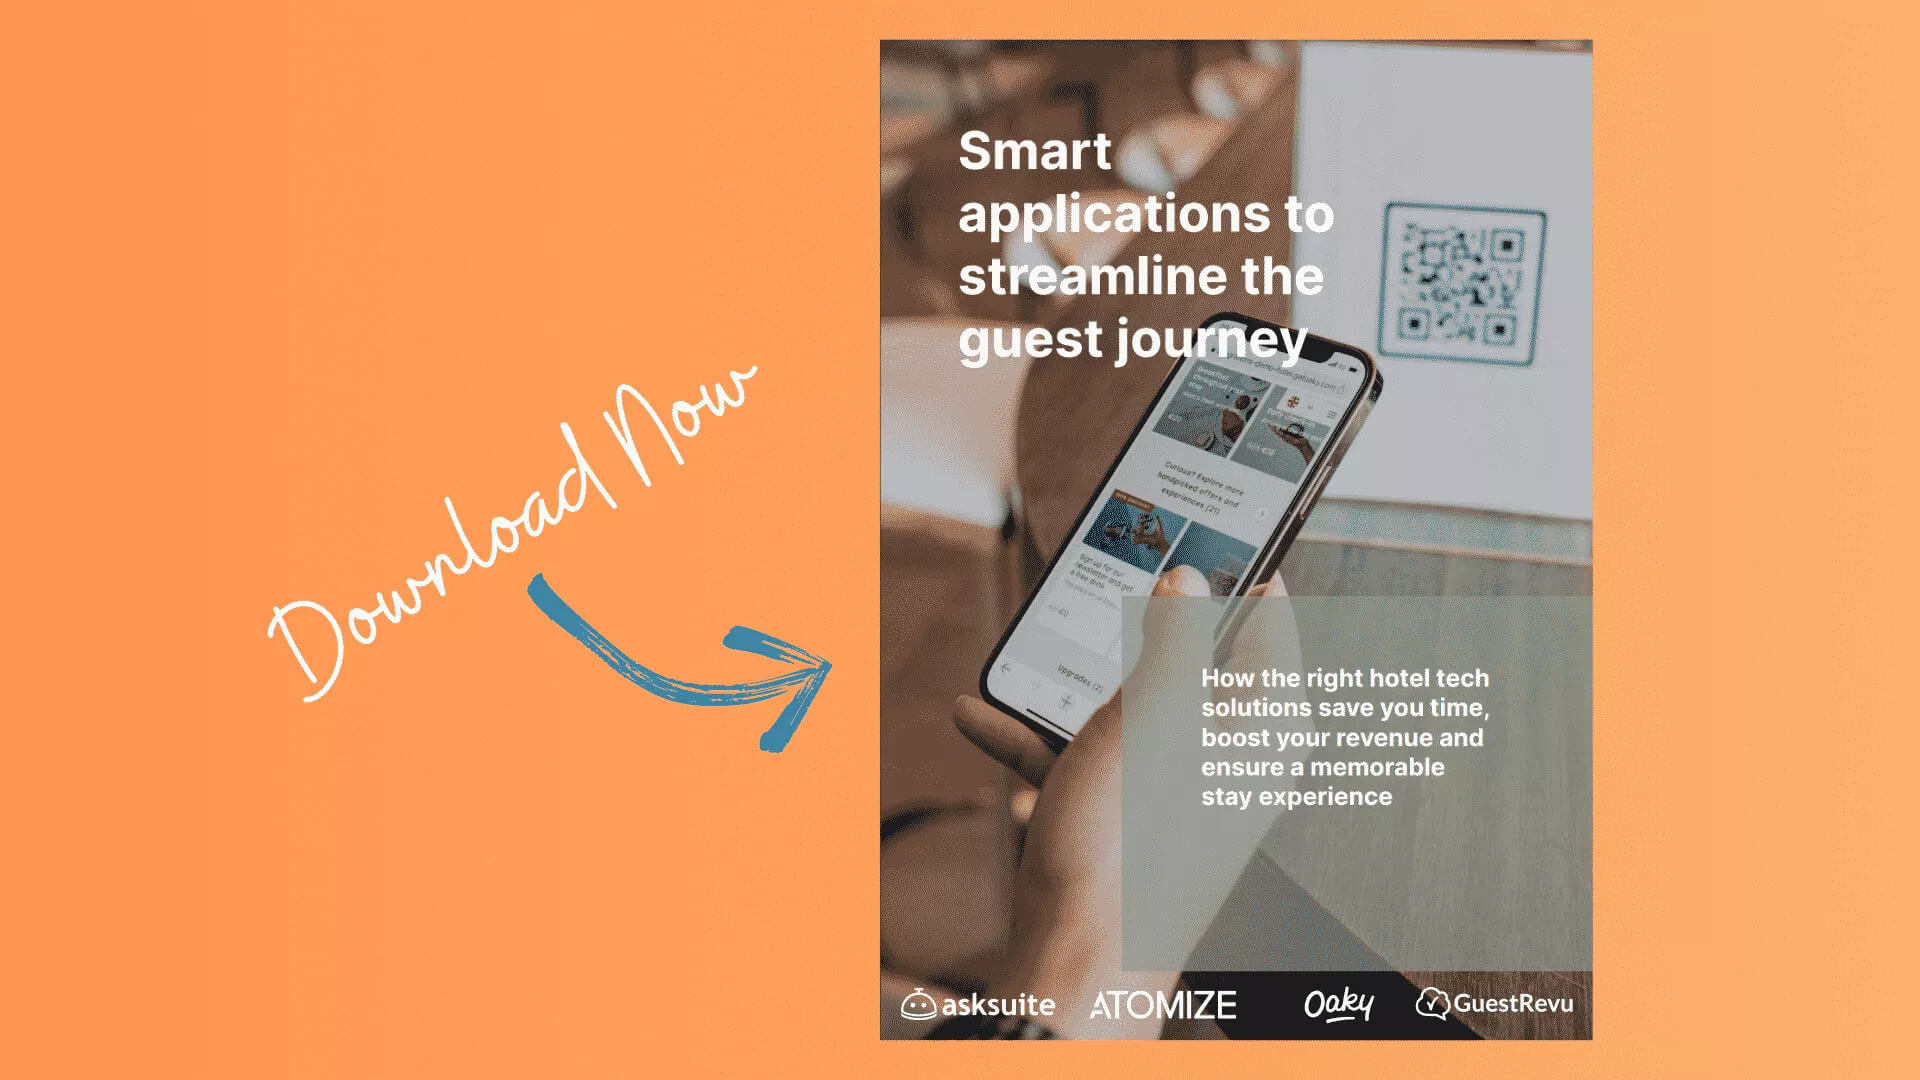 image thumbnail of atomize guide about smart applications to streamline guest journey and boost revenue